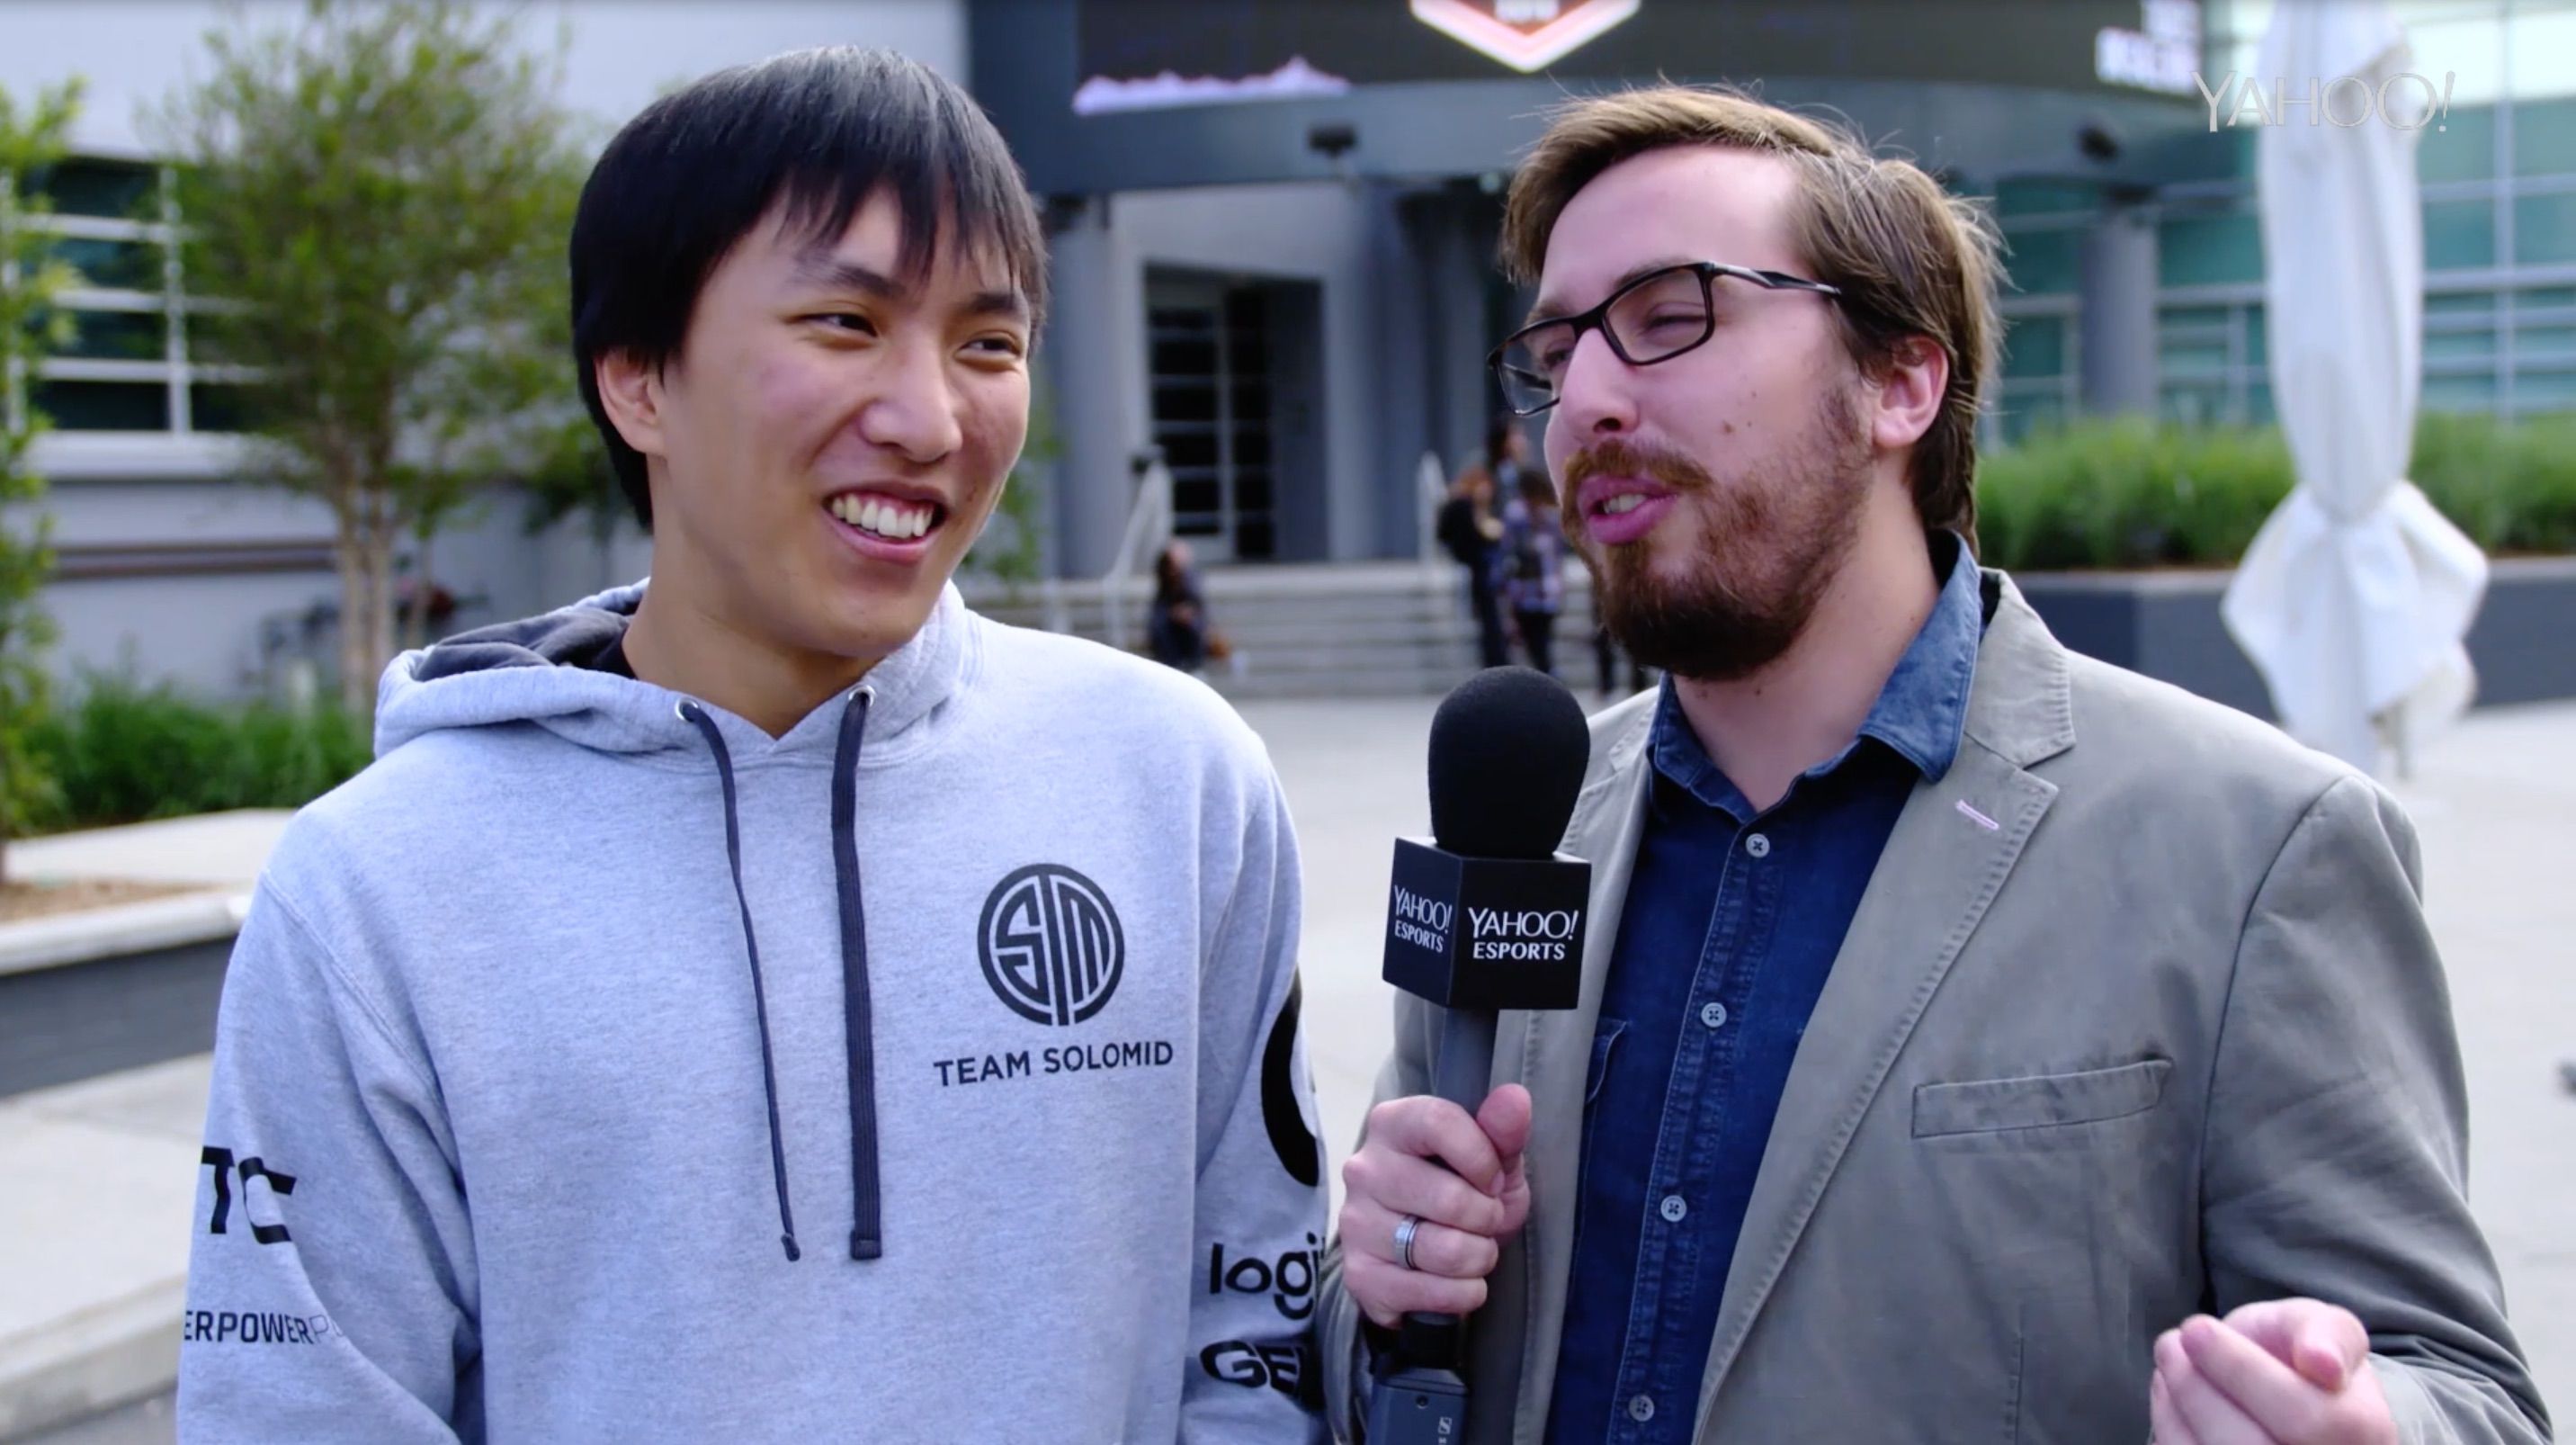 Doublelift being interviewed by Travis Gafford, his friend and former roomate